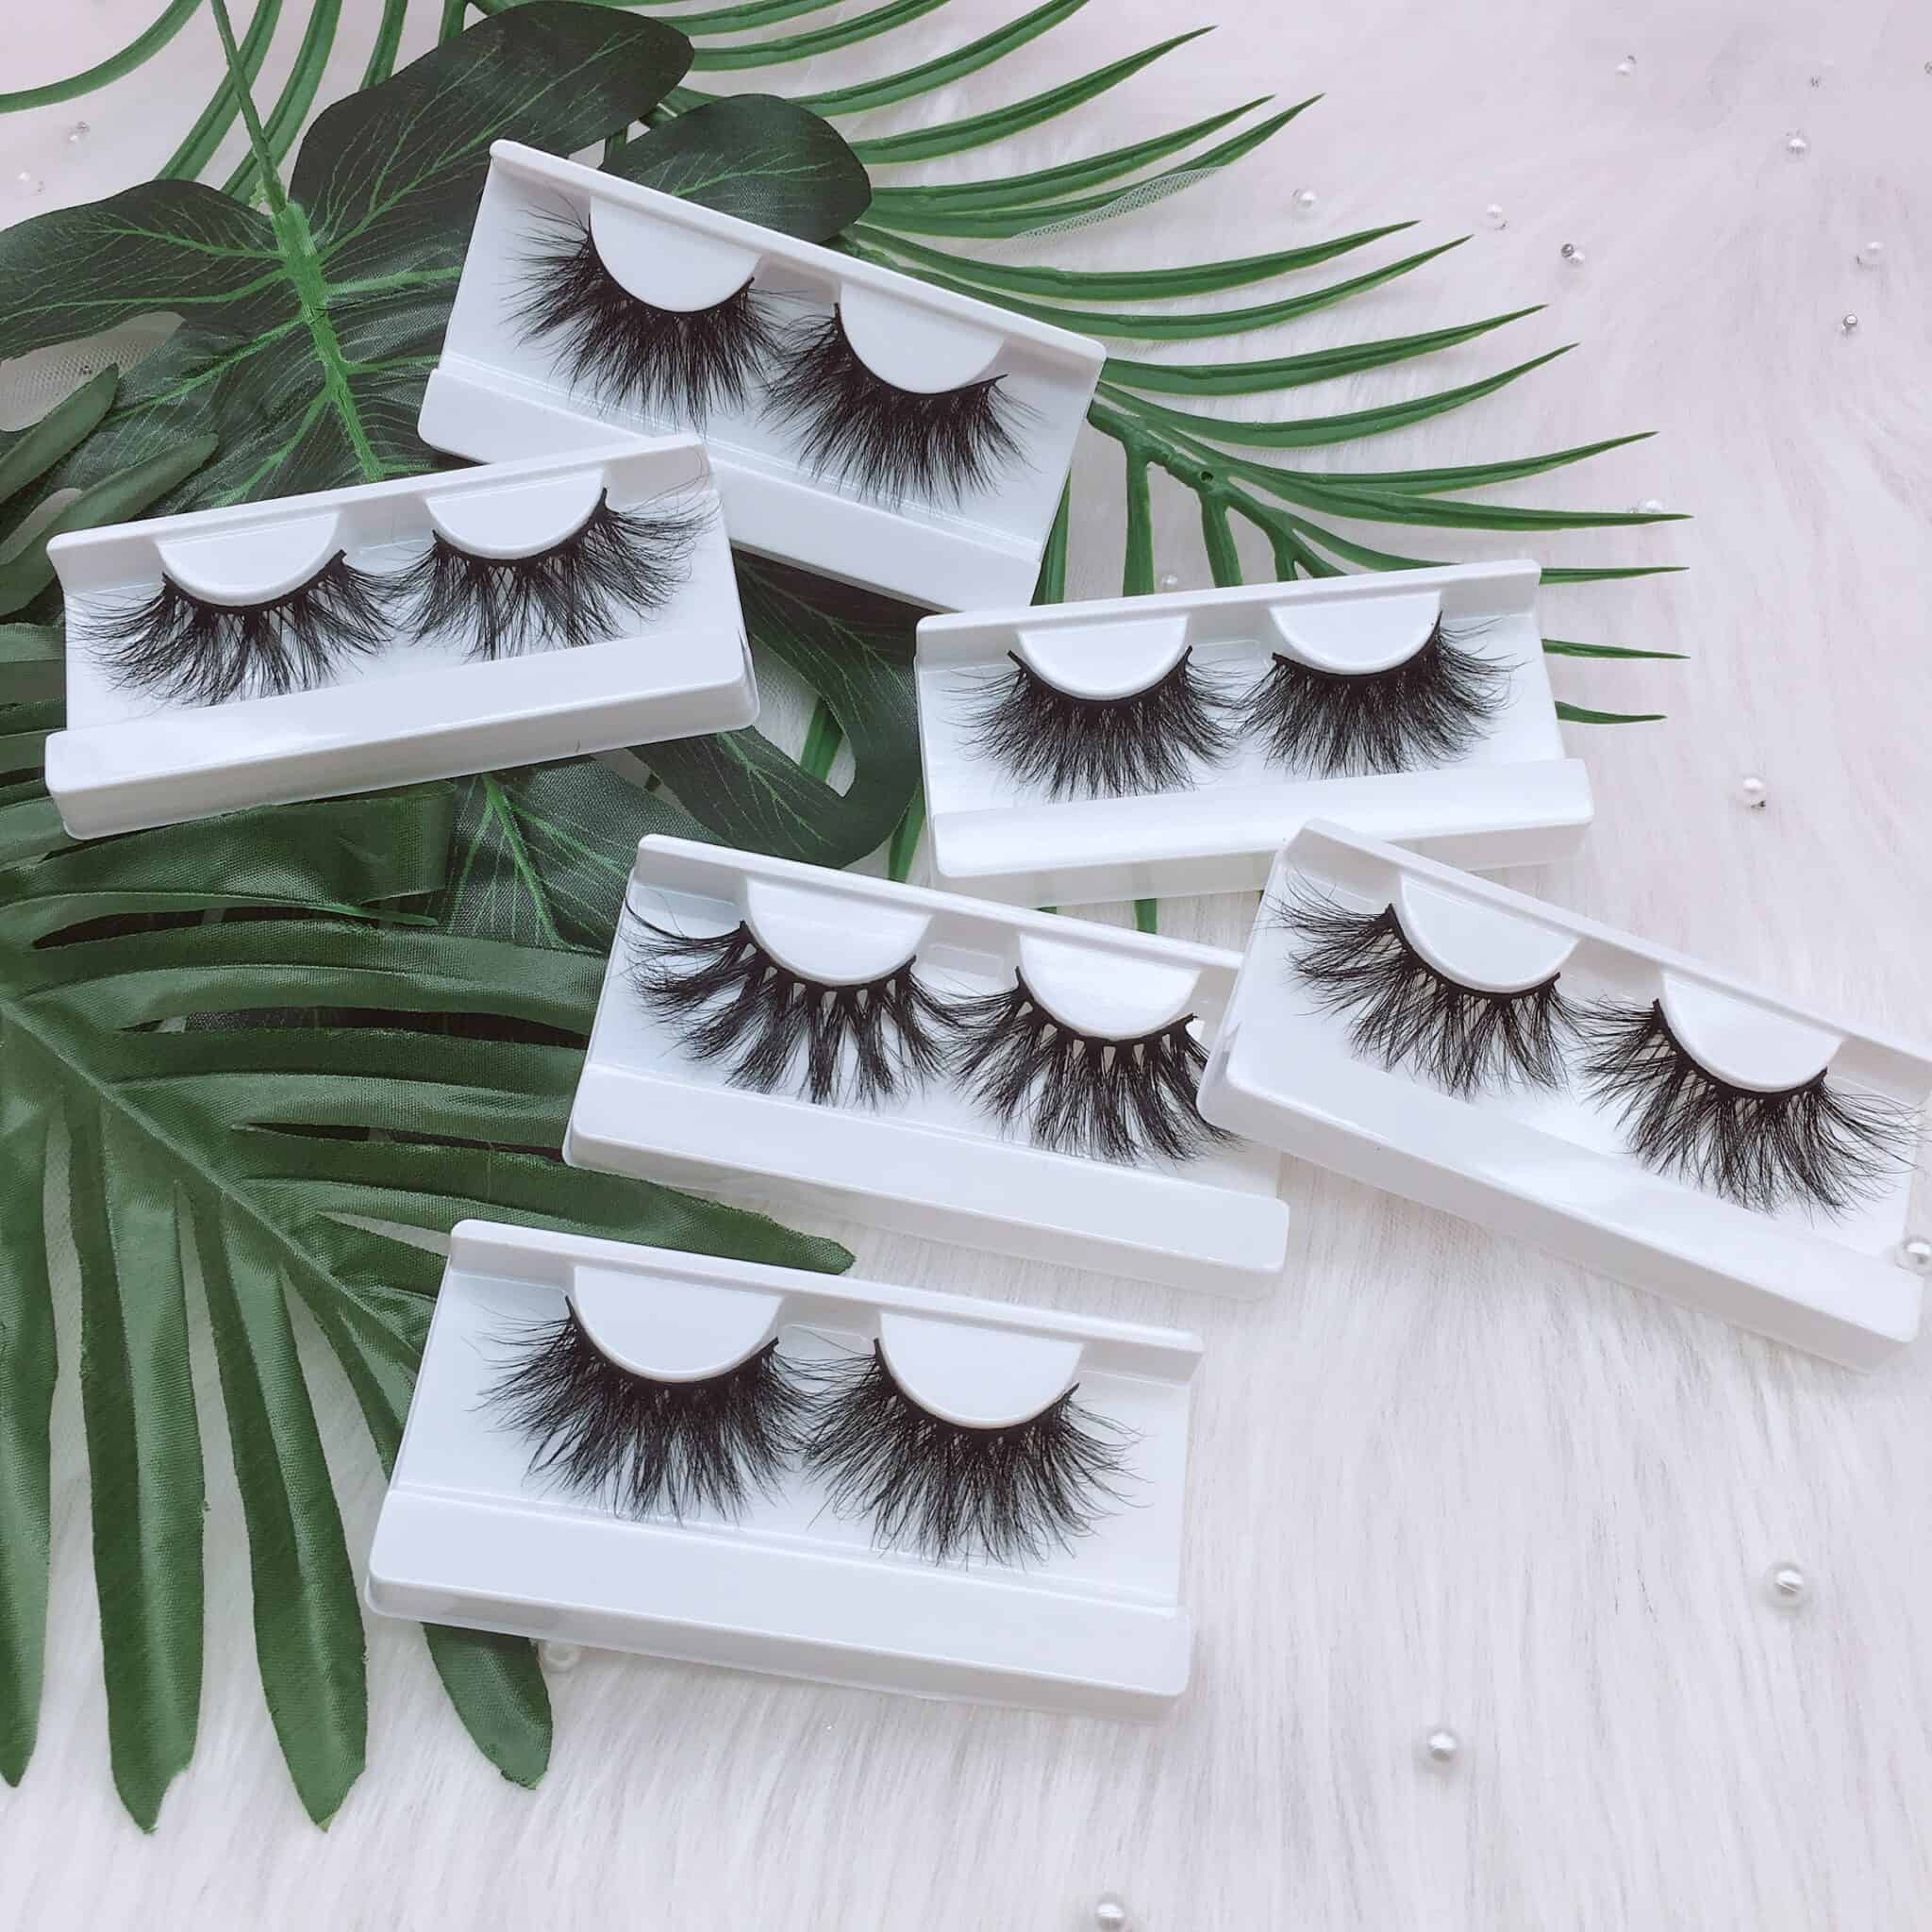 Miss Angel Lashes Start Your D Mink Eyelashes Business Here